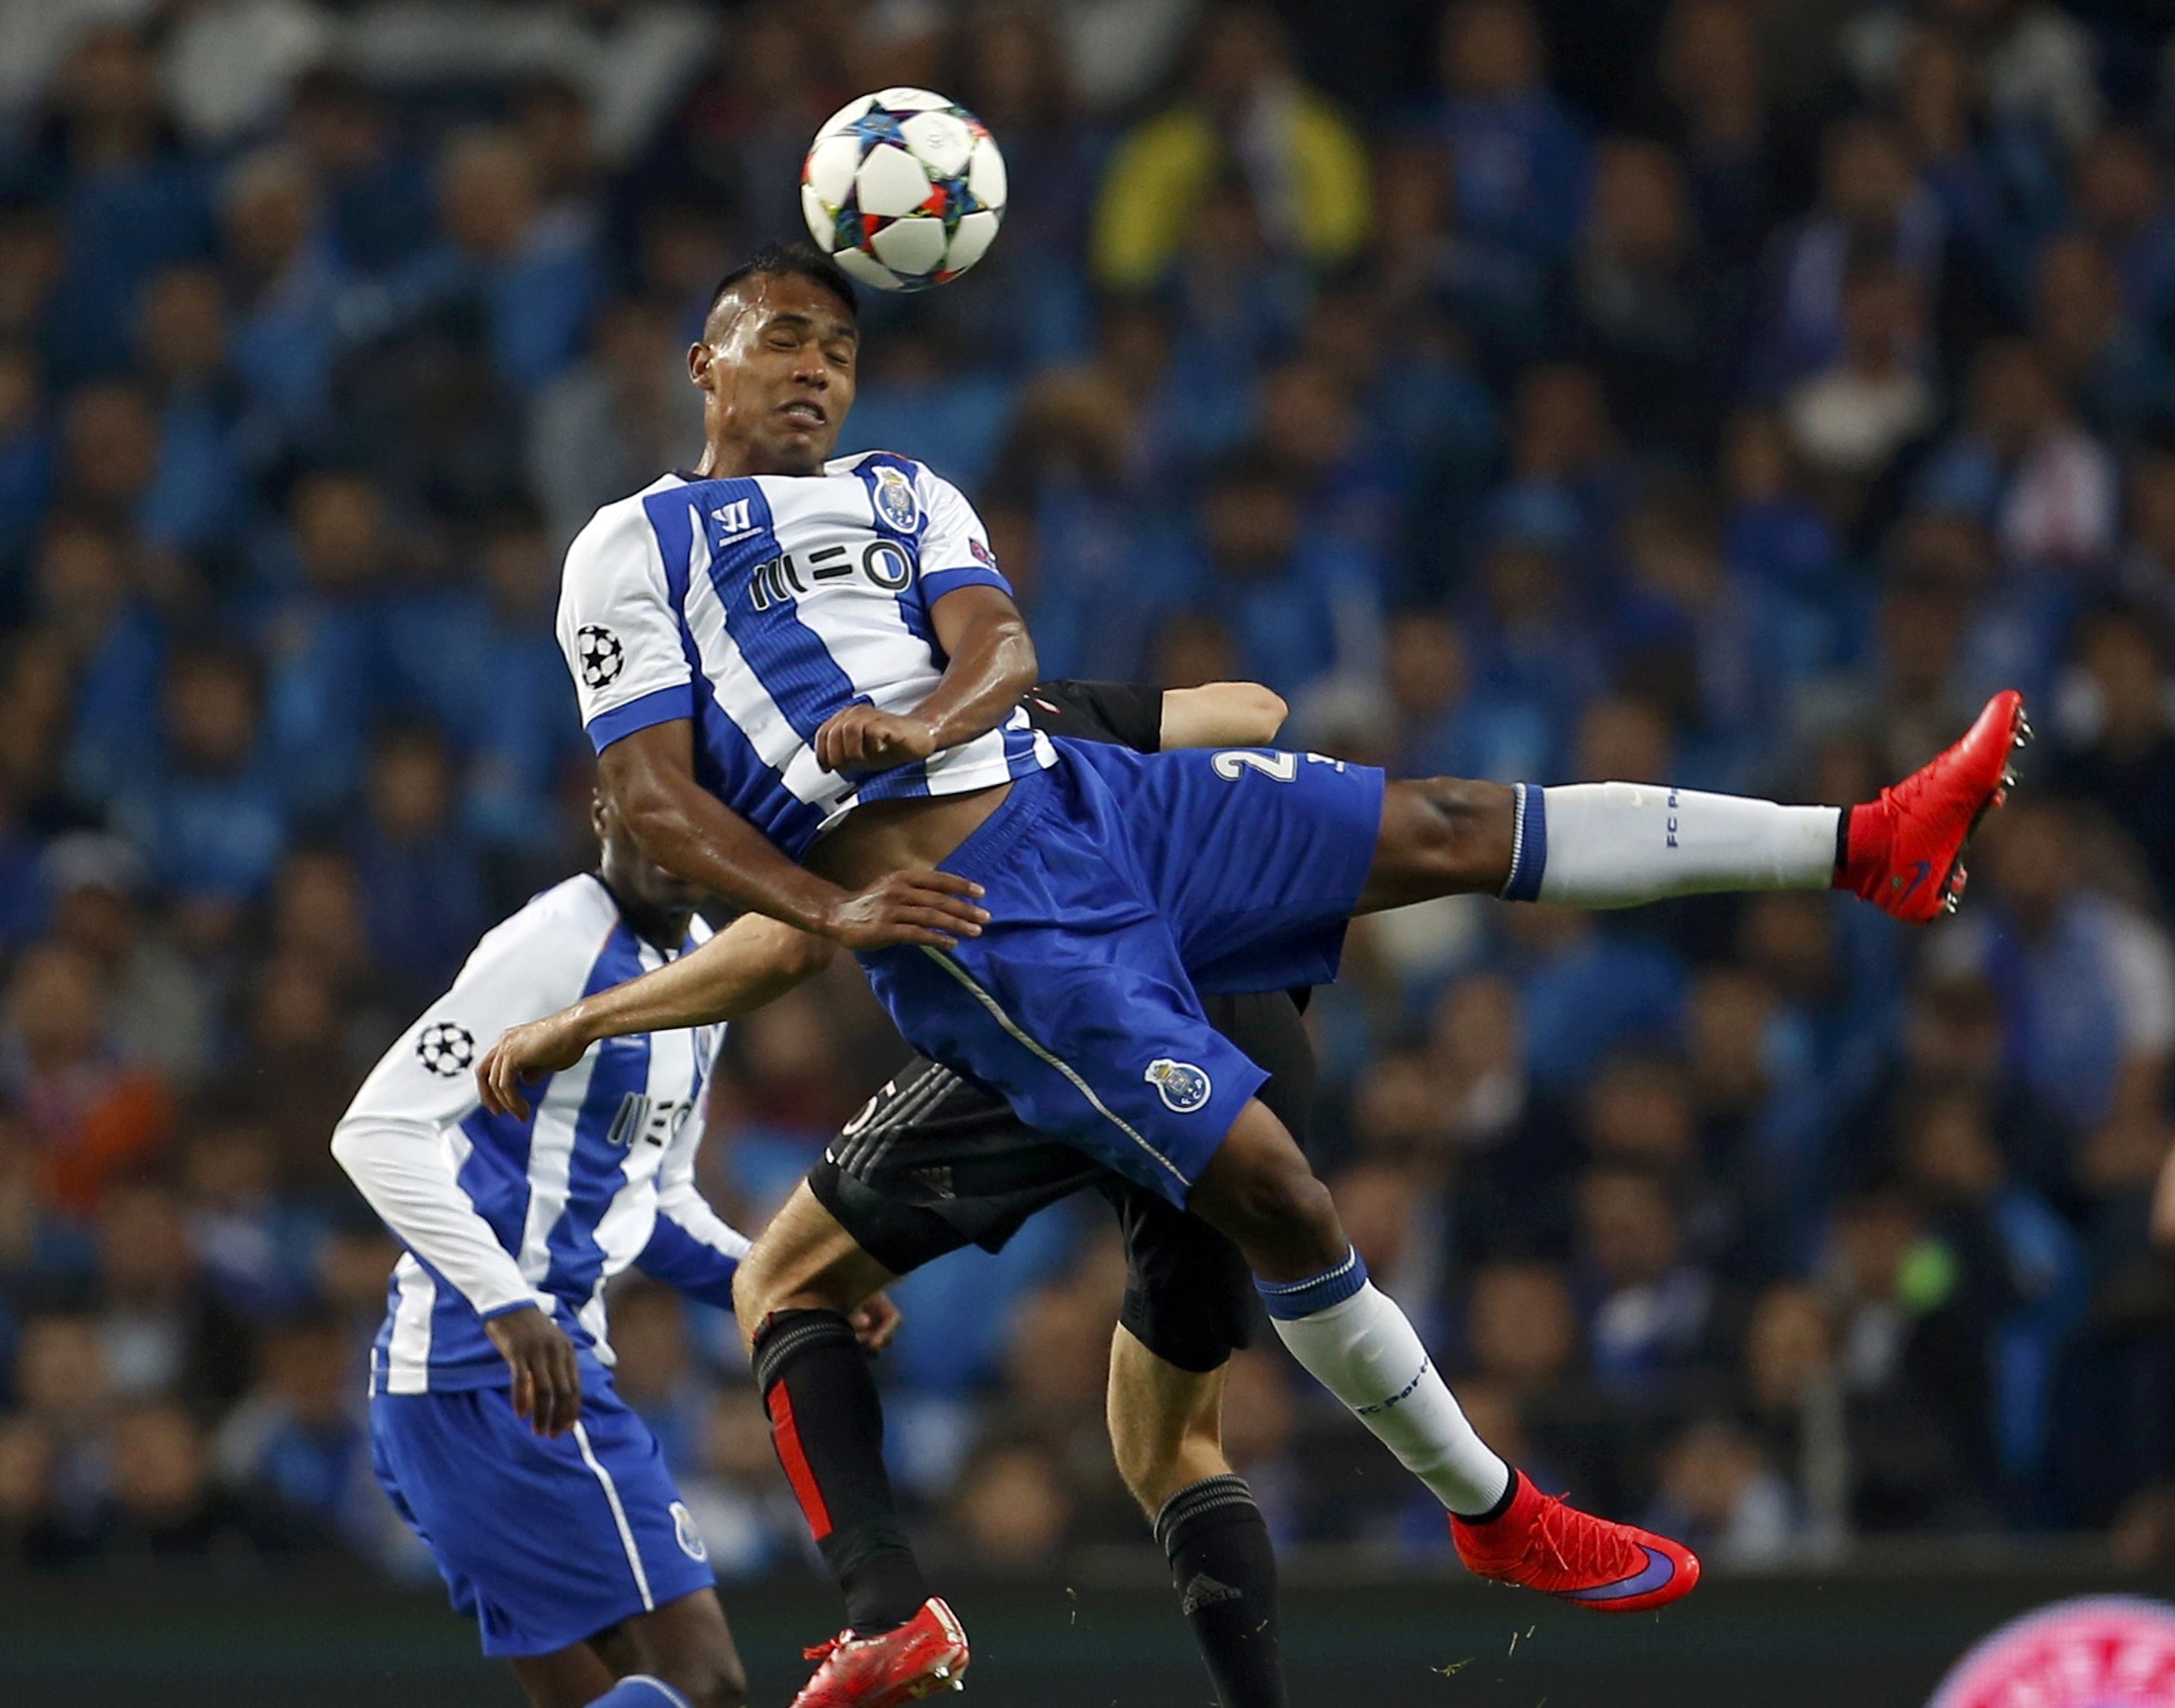 Porto poised for semis after stunning Bayern